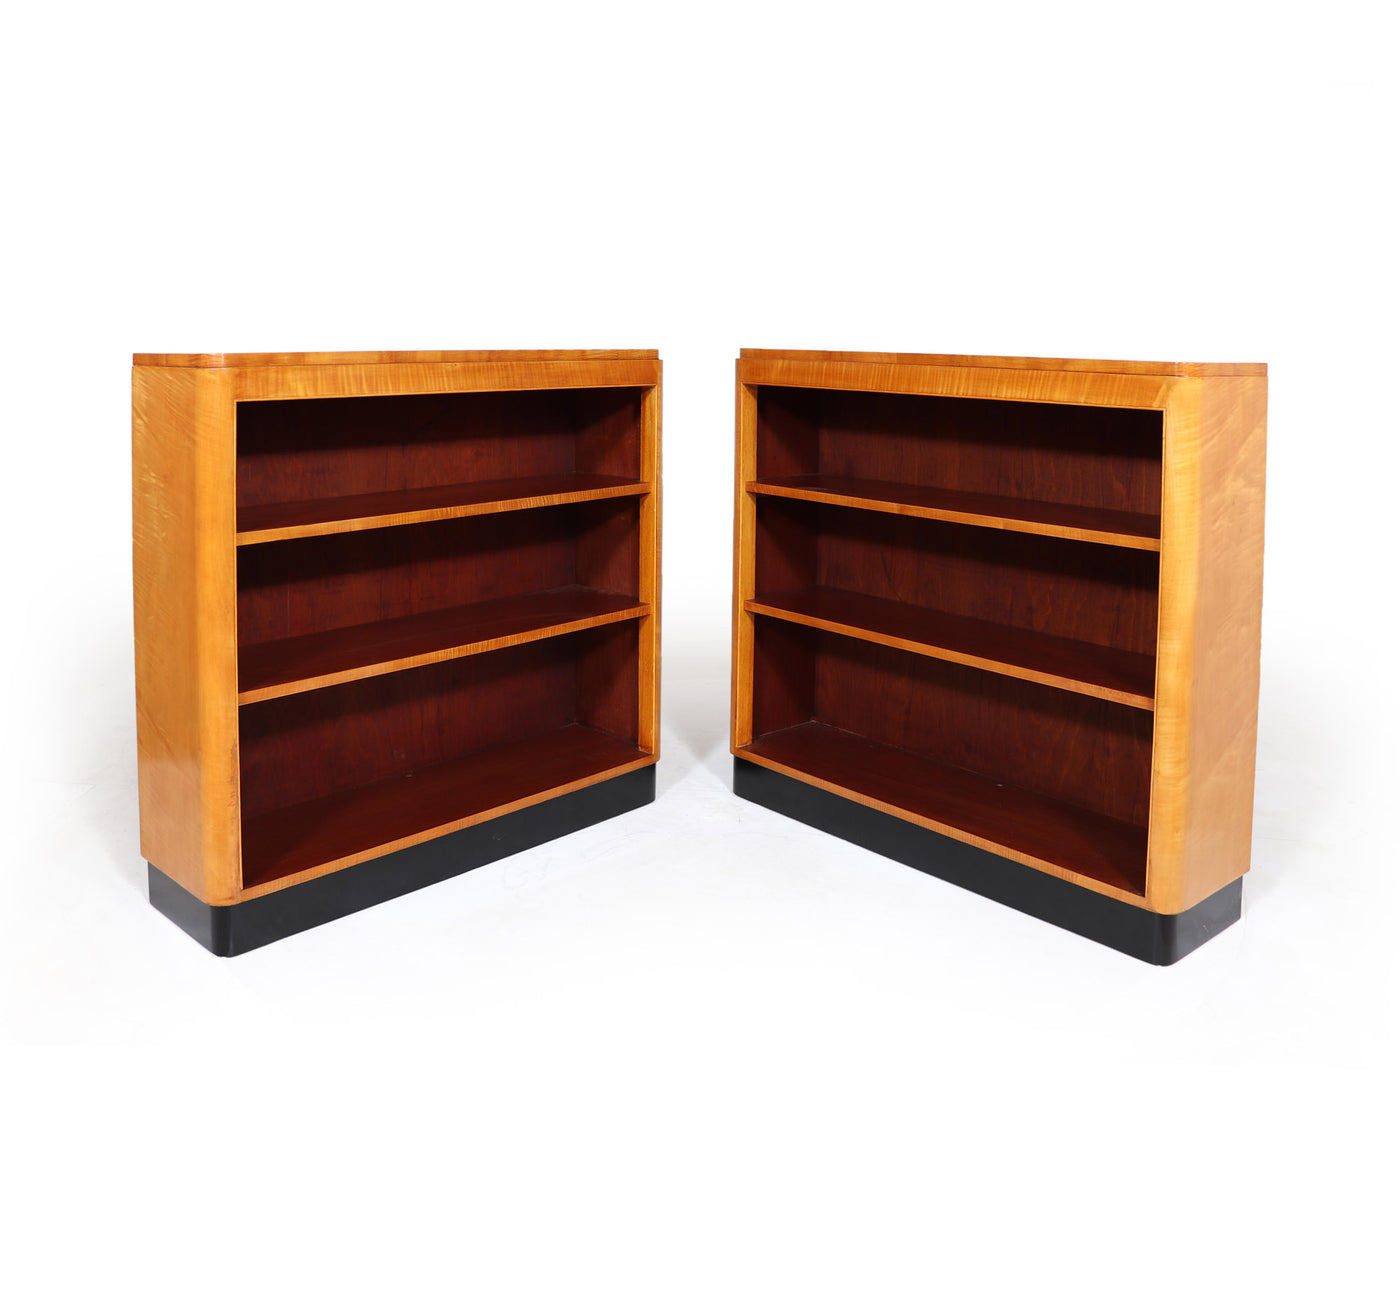 Pair of English Art Deco Sycamore Bookcases front